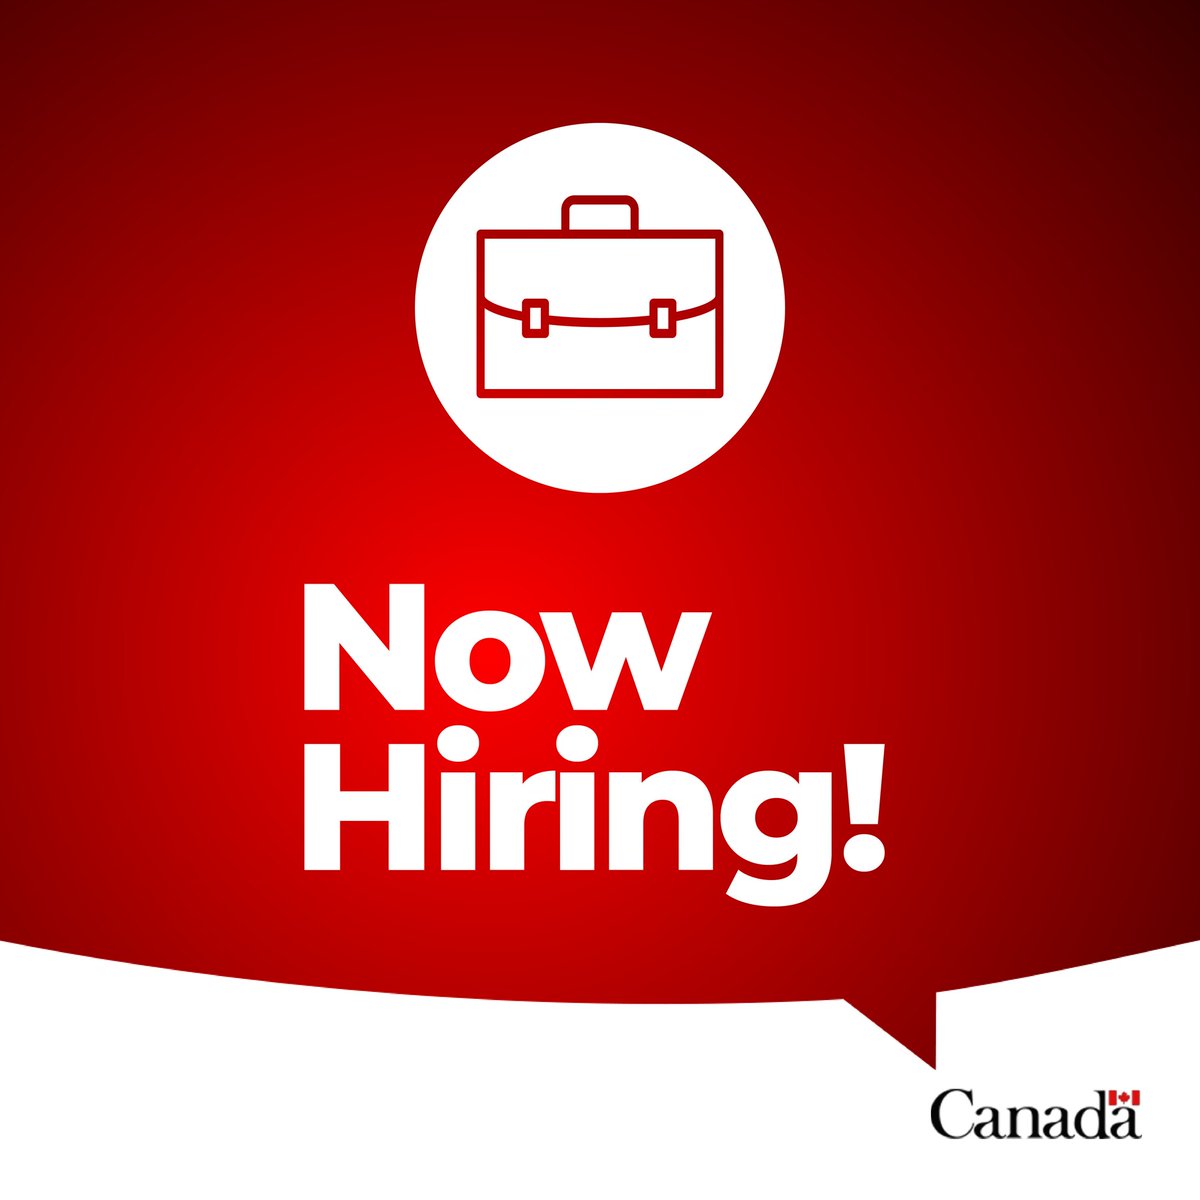 Got a passion for protocol and events? You could be our ideal candidate. Details and application deadline here: staffing-les.international.gc.ca/en/careers/pro…